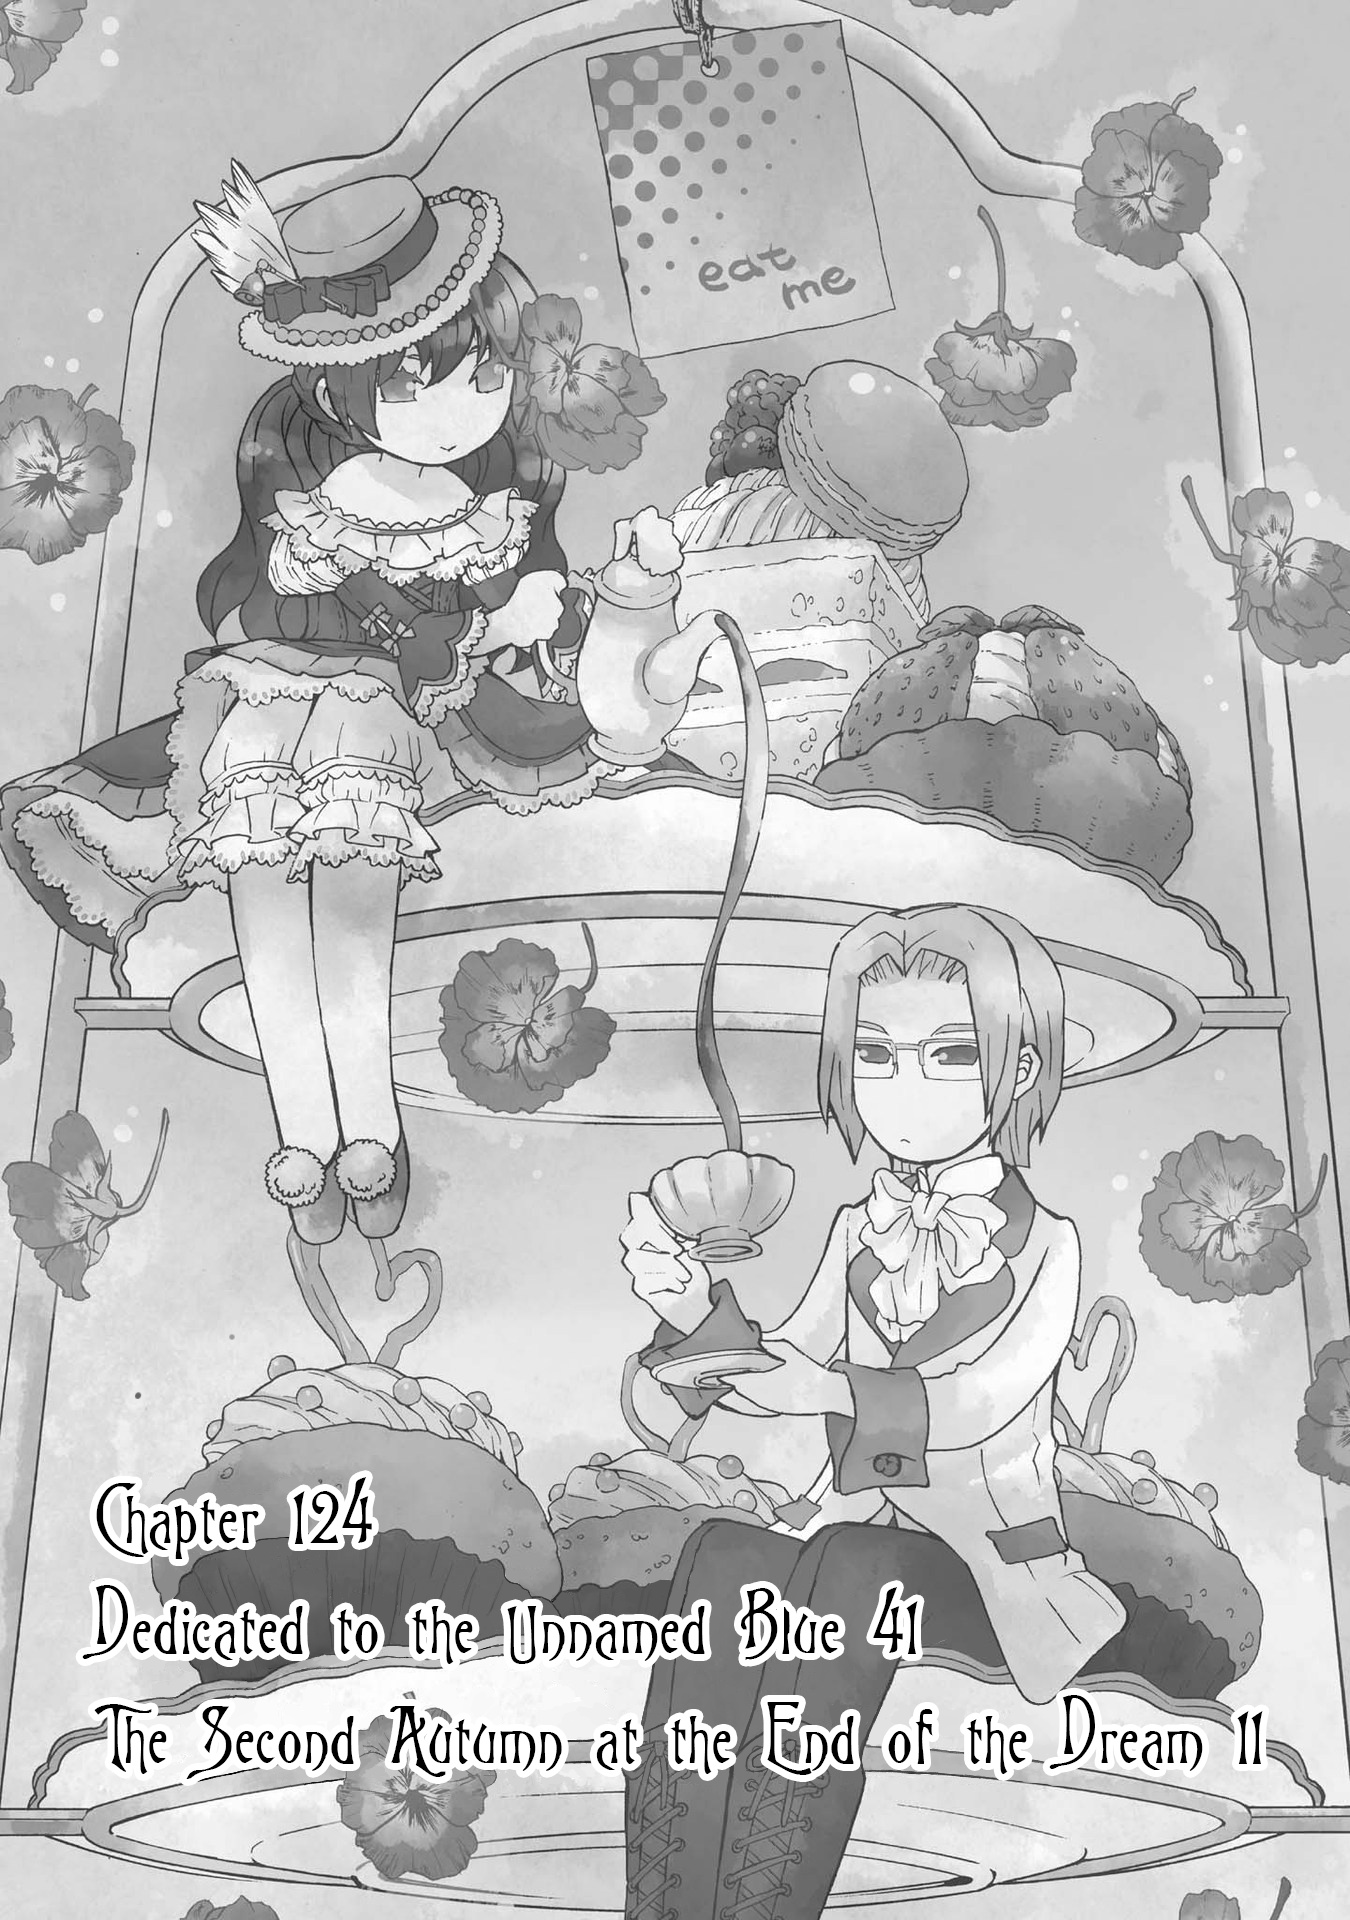 Hatenkou Yuugi Vol.18 Chapter 124: Dedicated To The Unnamed Blue #41 - The Second Autumn At The End Of The Dream #11 - Picture 1